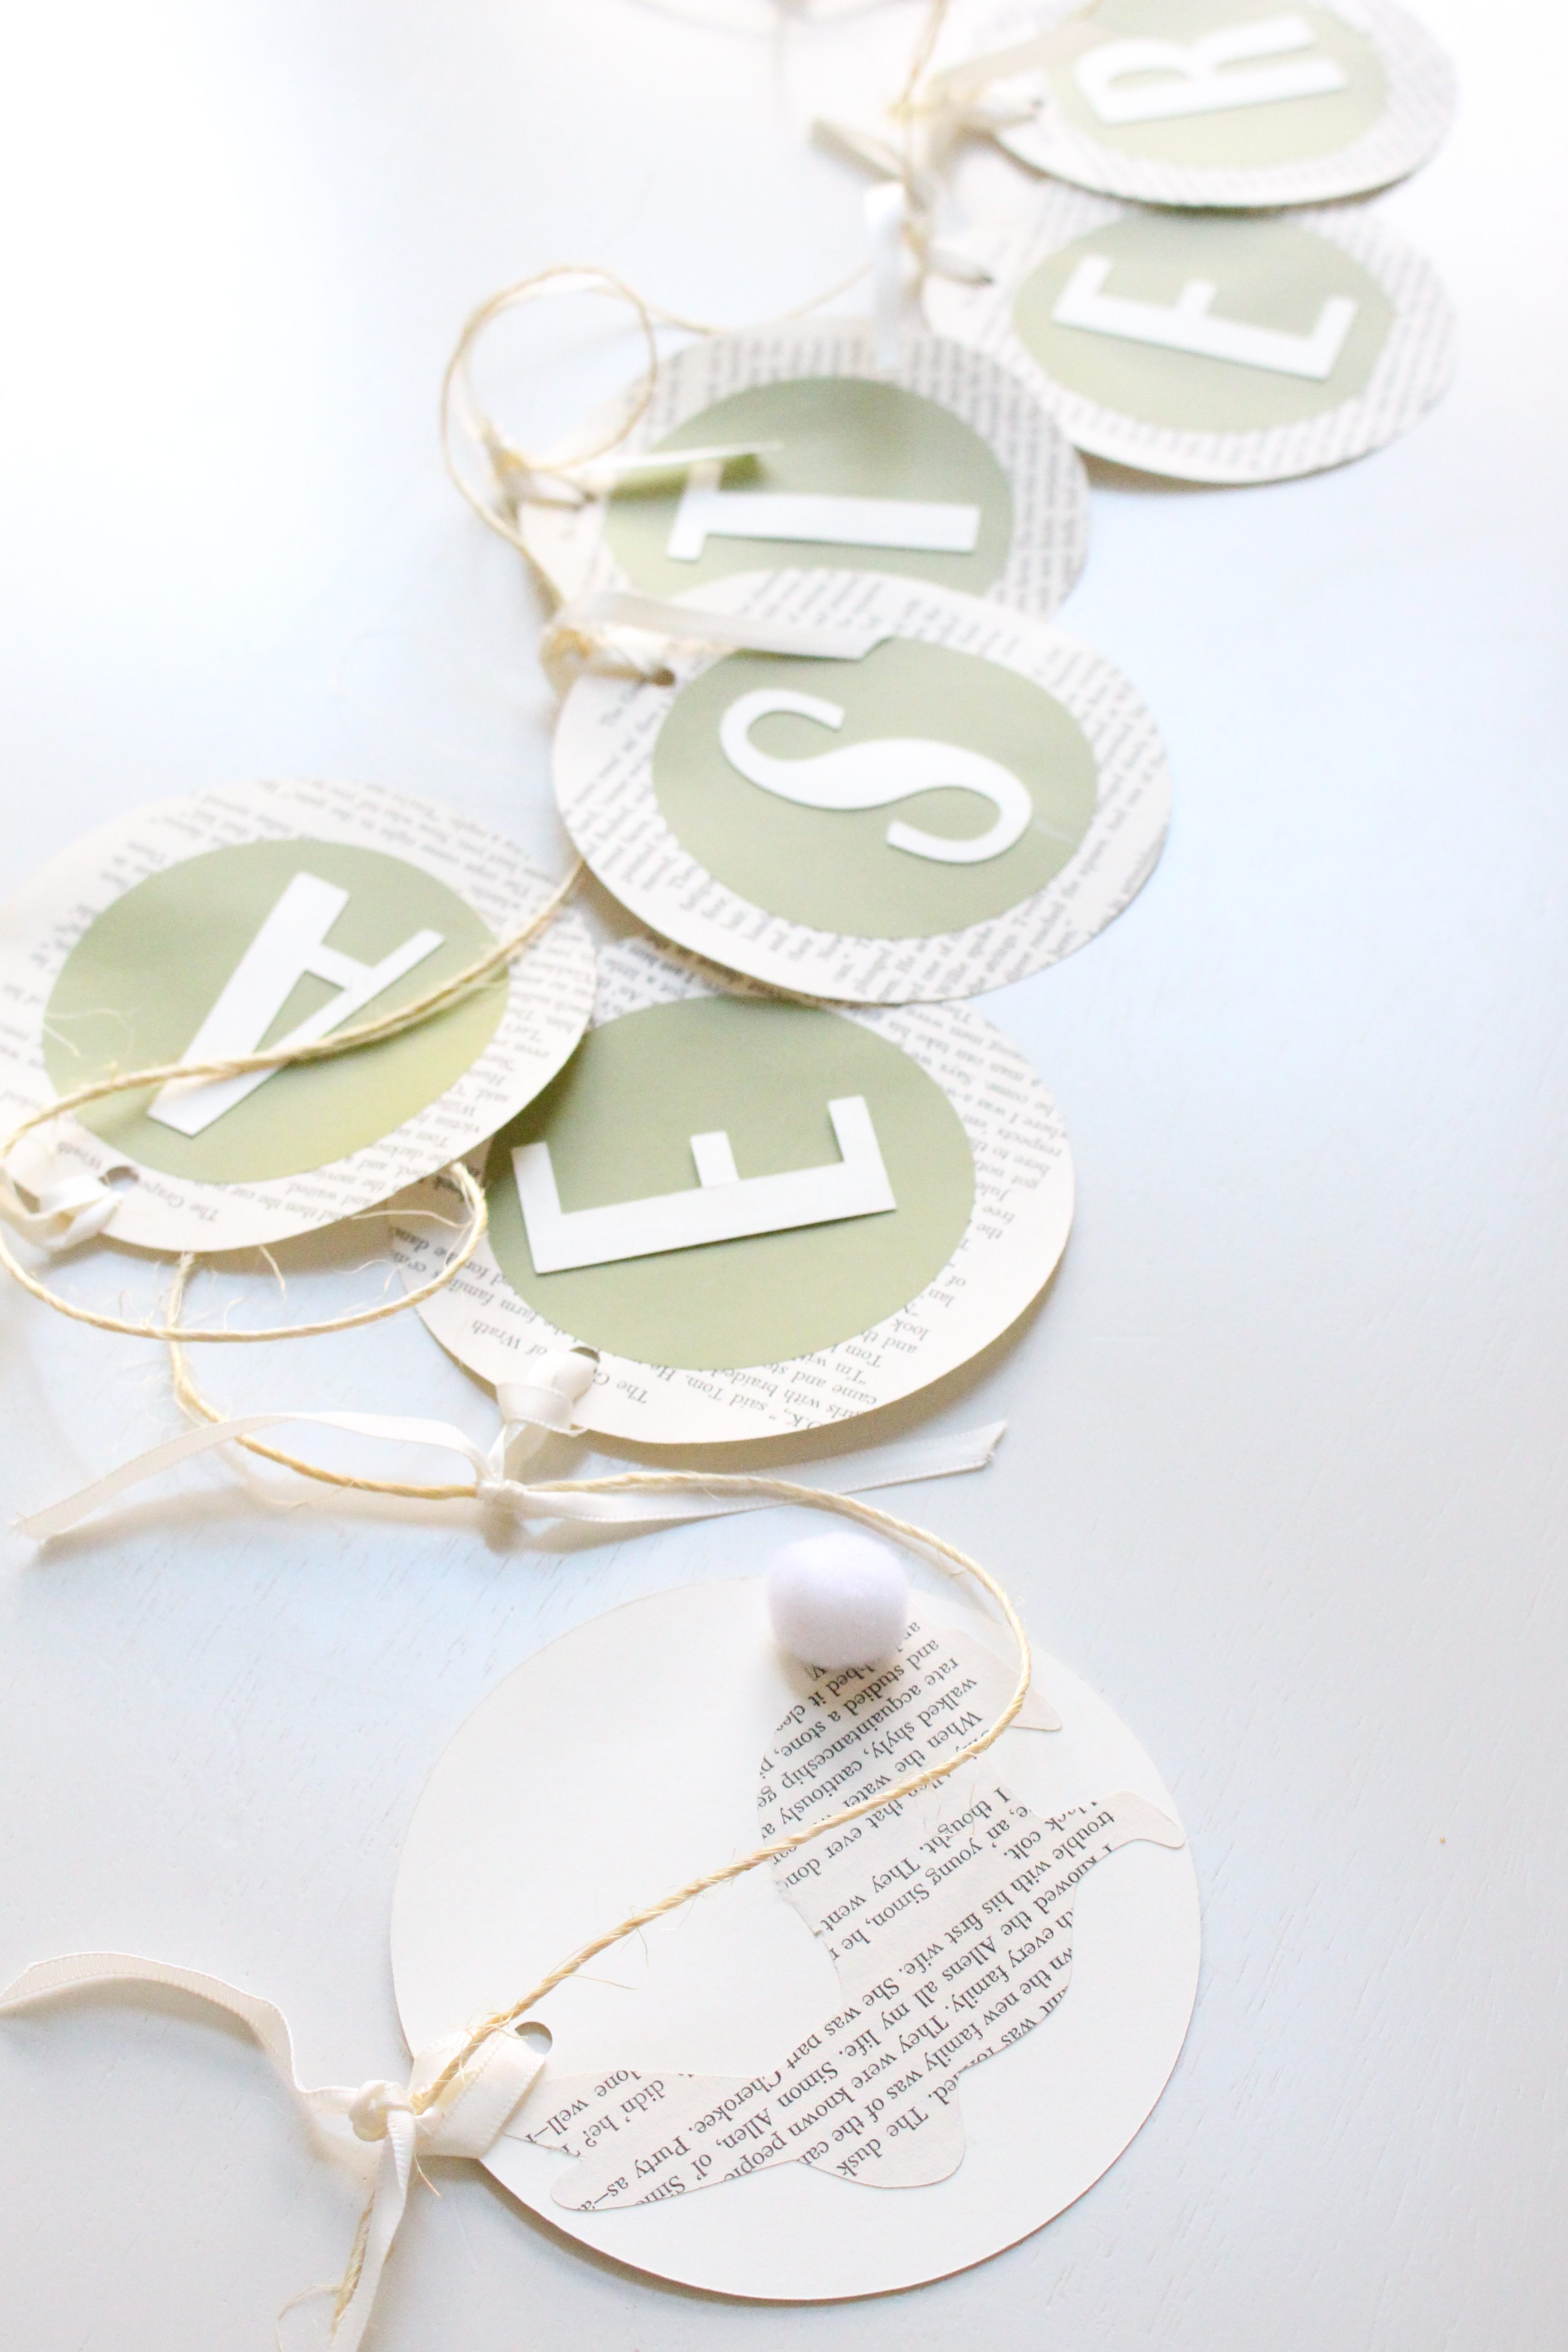 Book page crafts- Easter Garland- DIY garland- projects using book pages- Holidays- Easter crafts